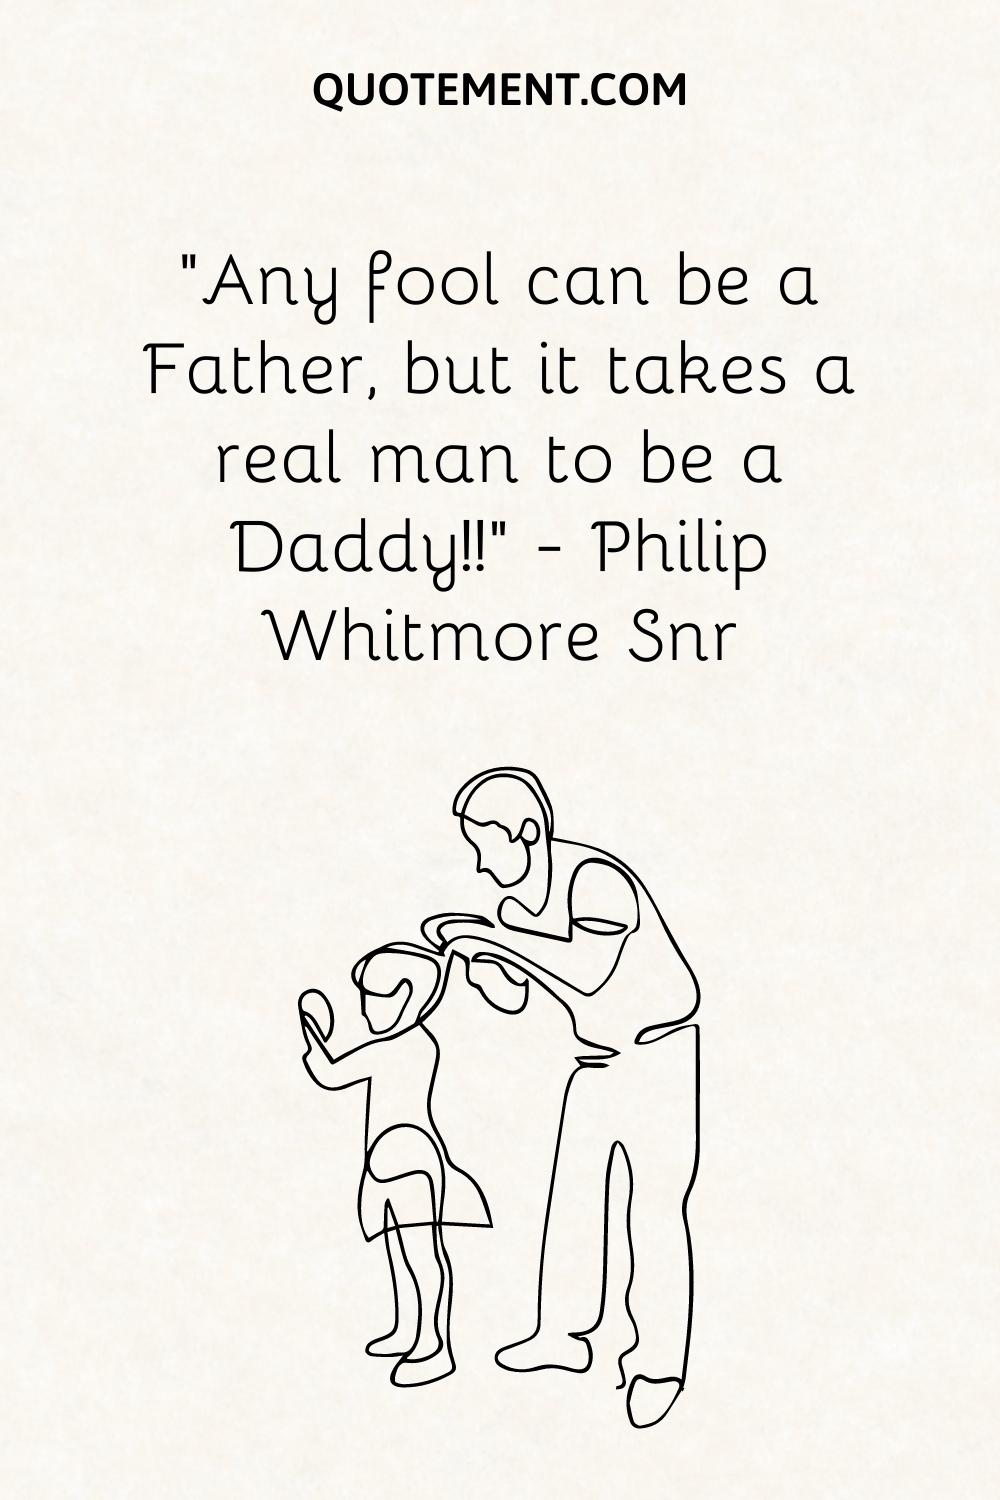 “Any fool can be a Father, but it takes a real man to be a Daddy!!” — Philip Whitmore Snr